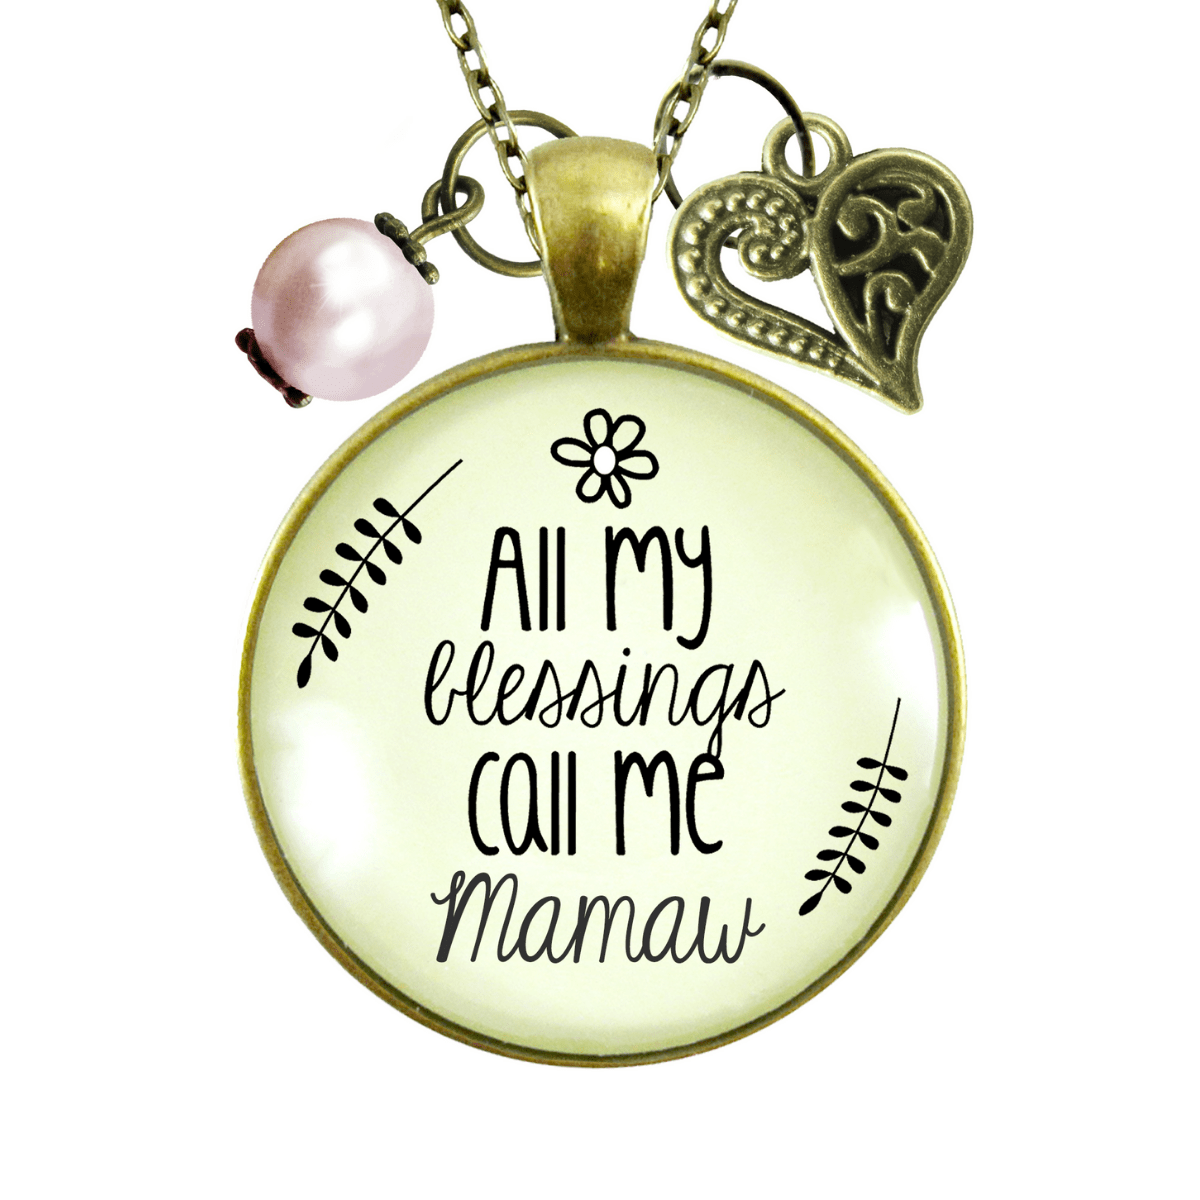 Gutsy Goodness Mamaw Necklace All My Blessings Southern Grandma Womens Family Gift Jewelry - Gutsy Goodness Handmade Jewelry;Mamaw Necklace All My Blessings Southern Grandma Womens Family Gift Jewelry - Gutsy Goodness Handmade Jewelry Gifts